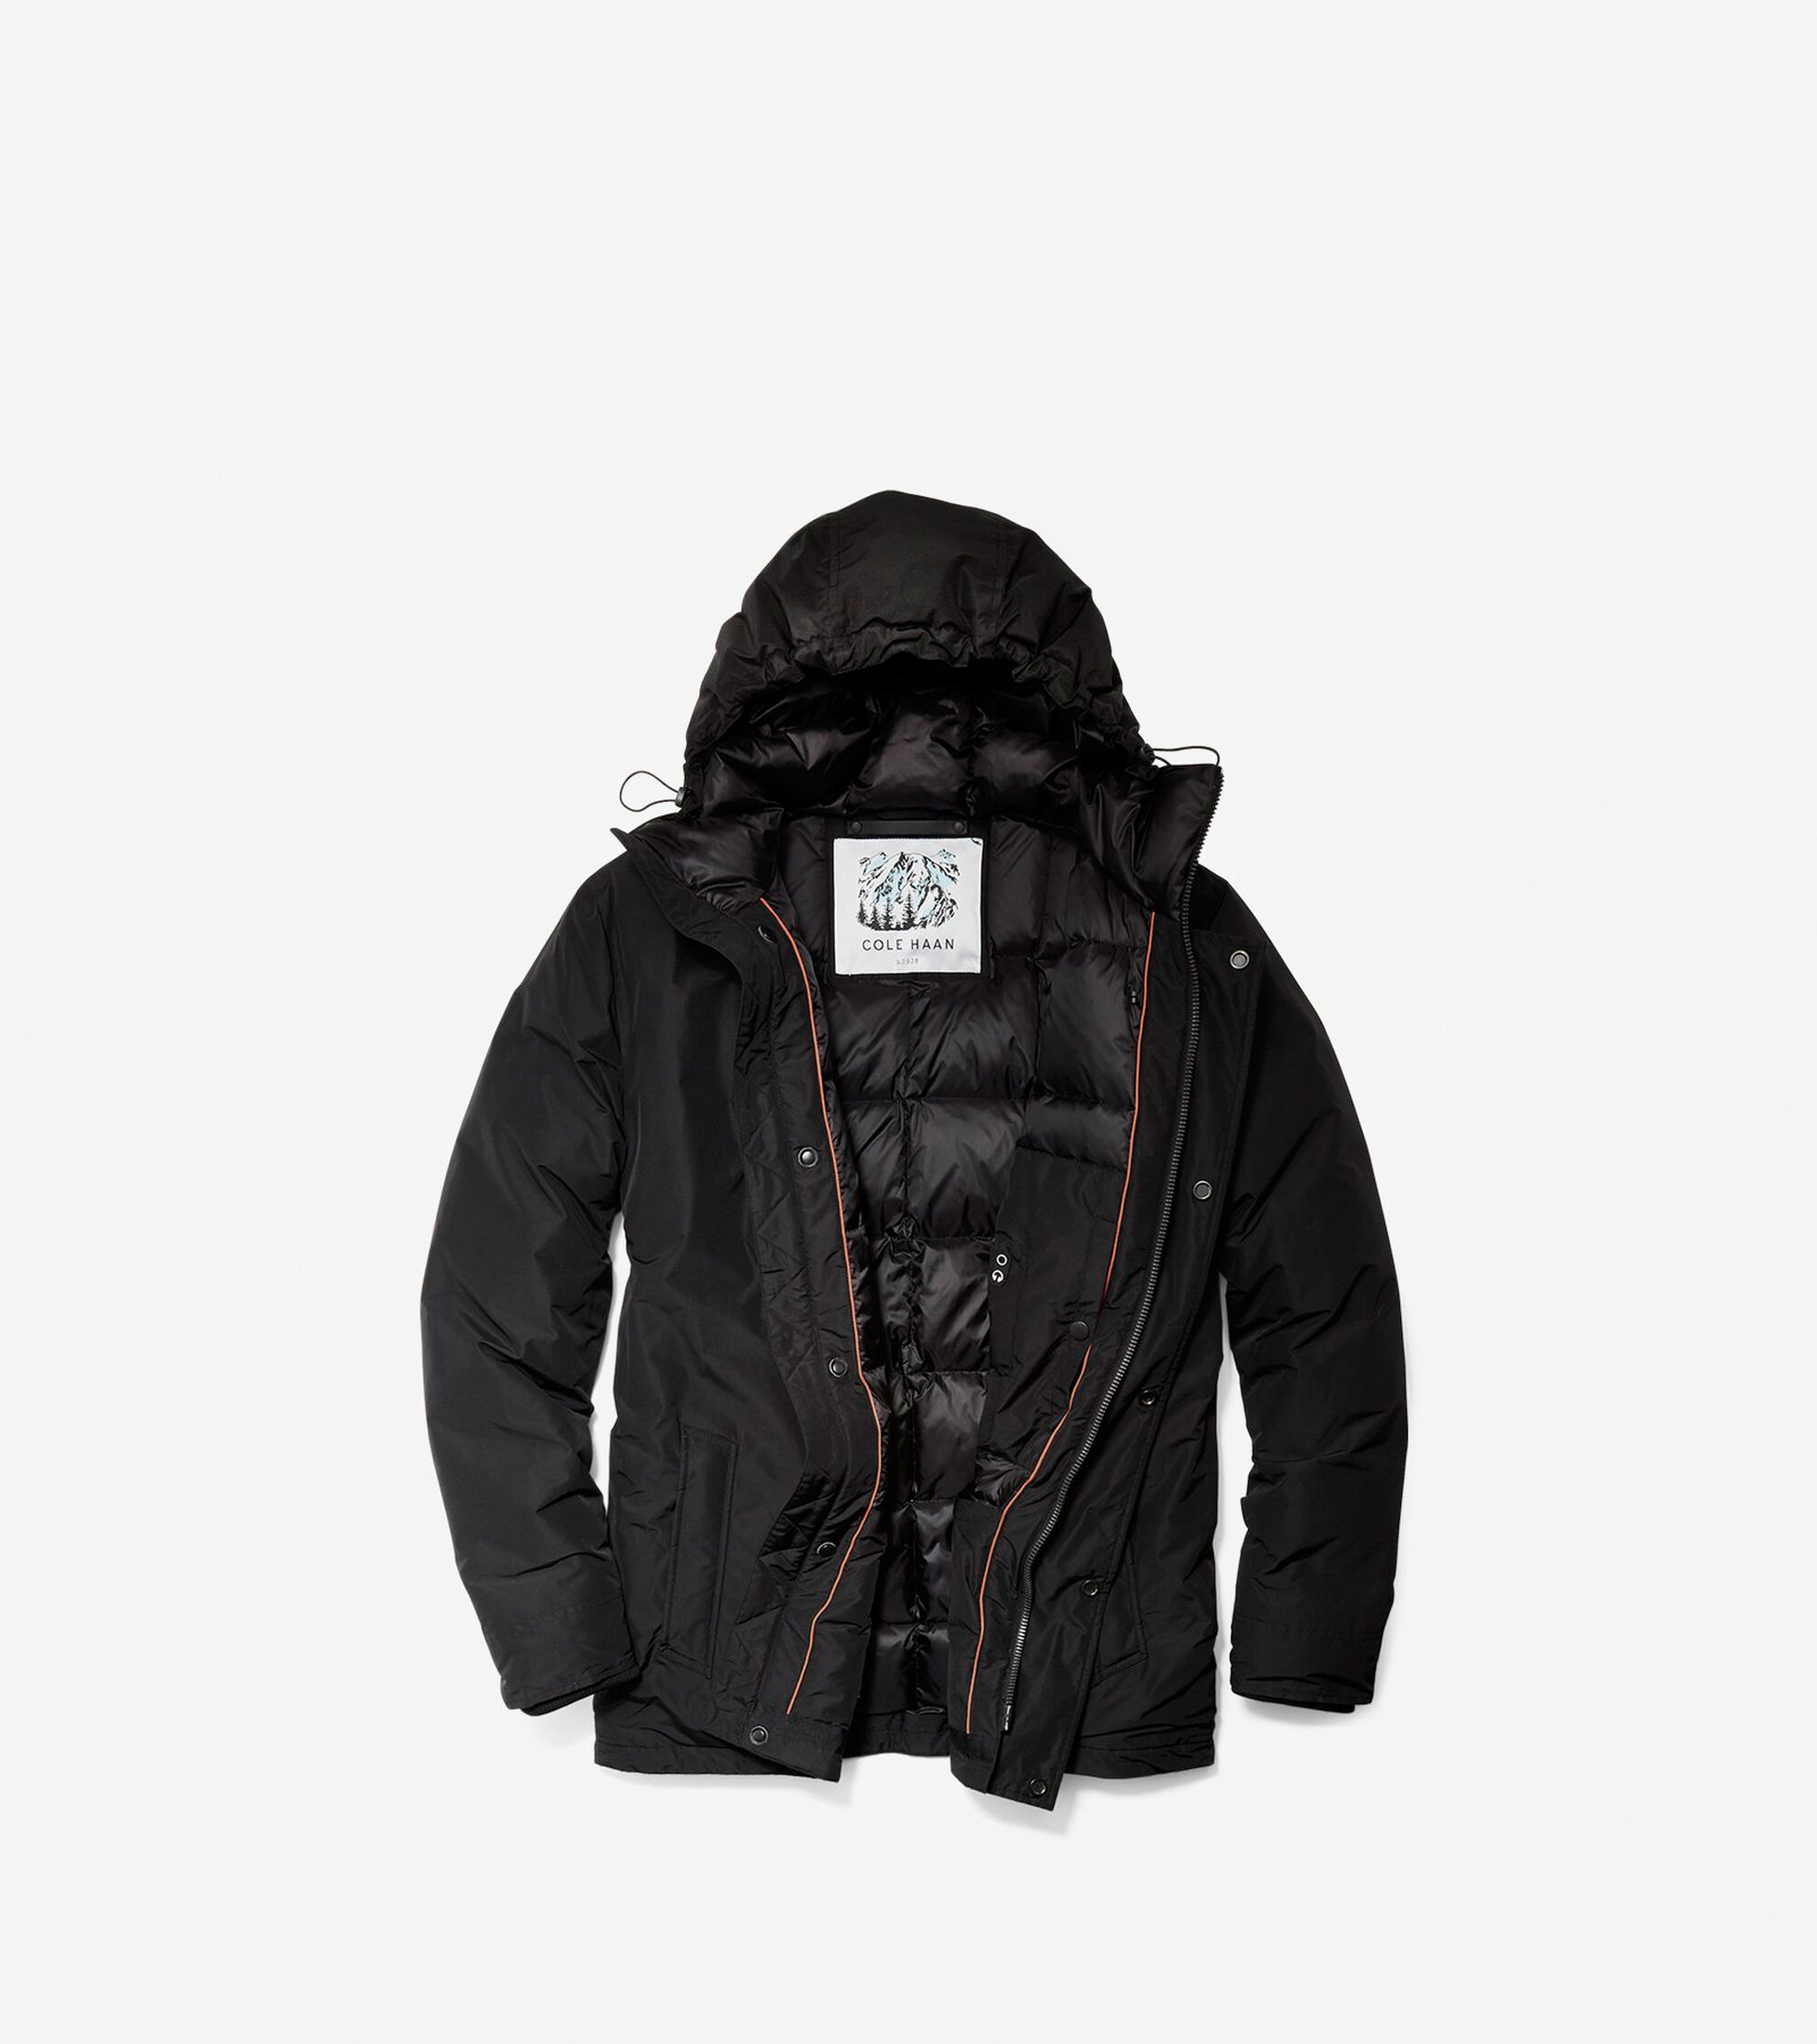 Men's Lightweight Down With Downtek™ Parka in Black | Cole Haan